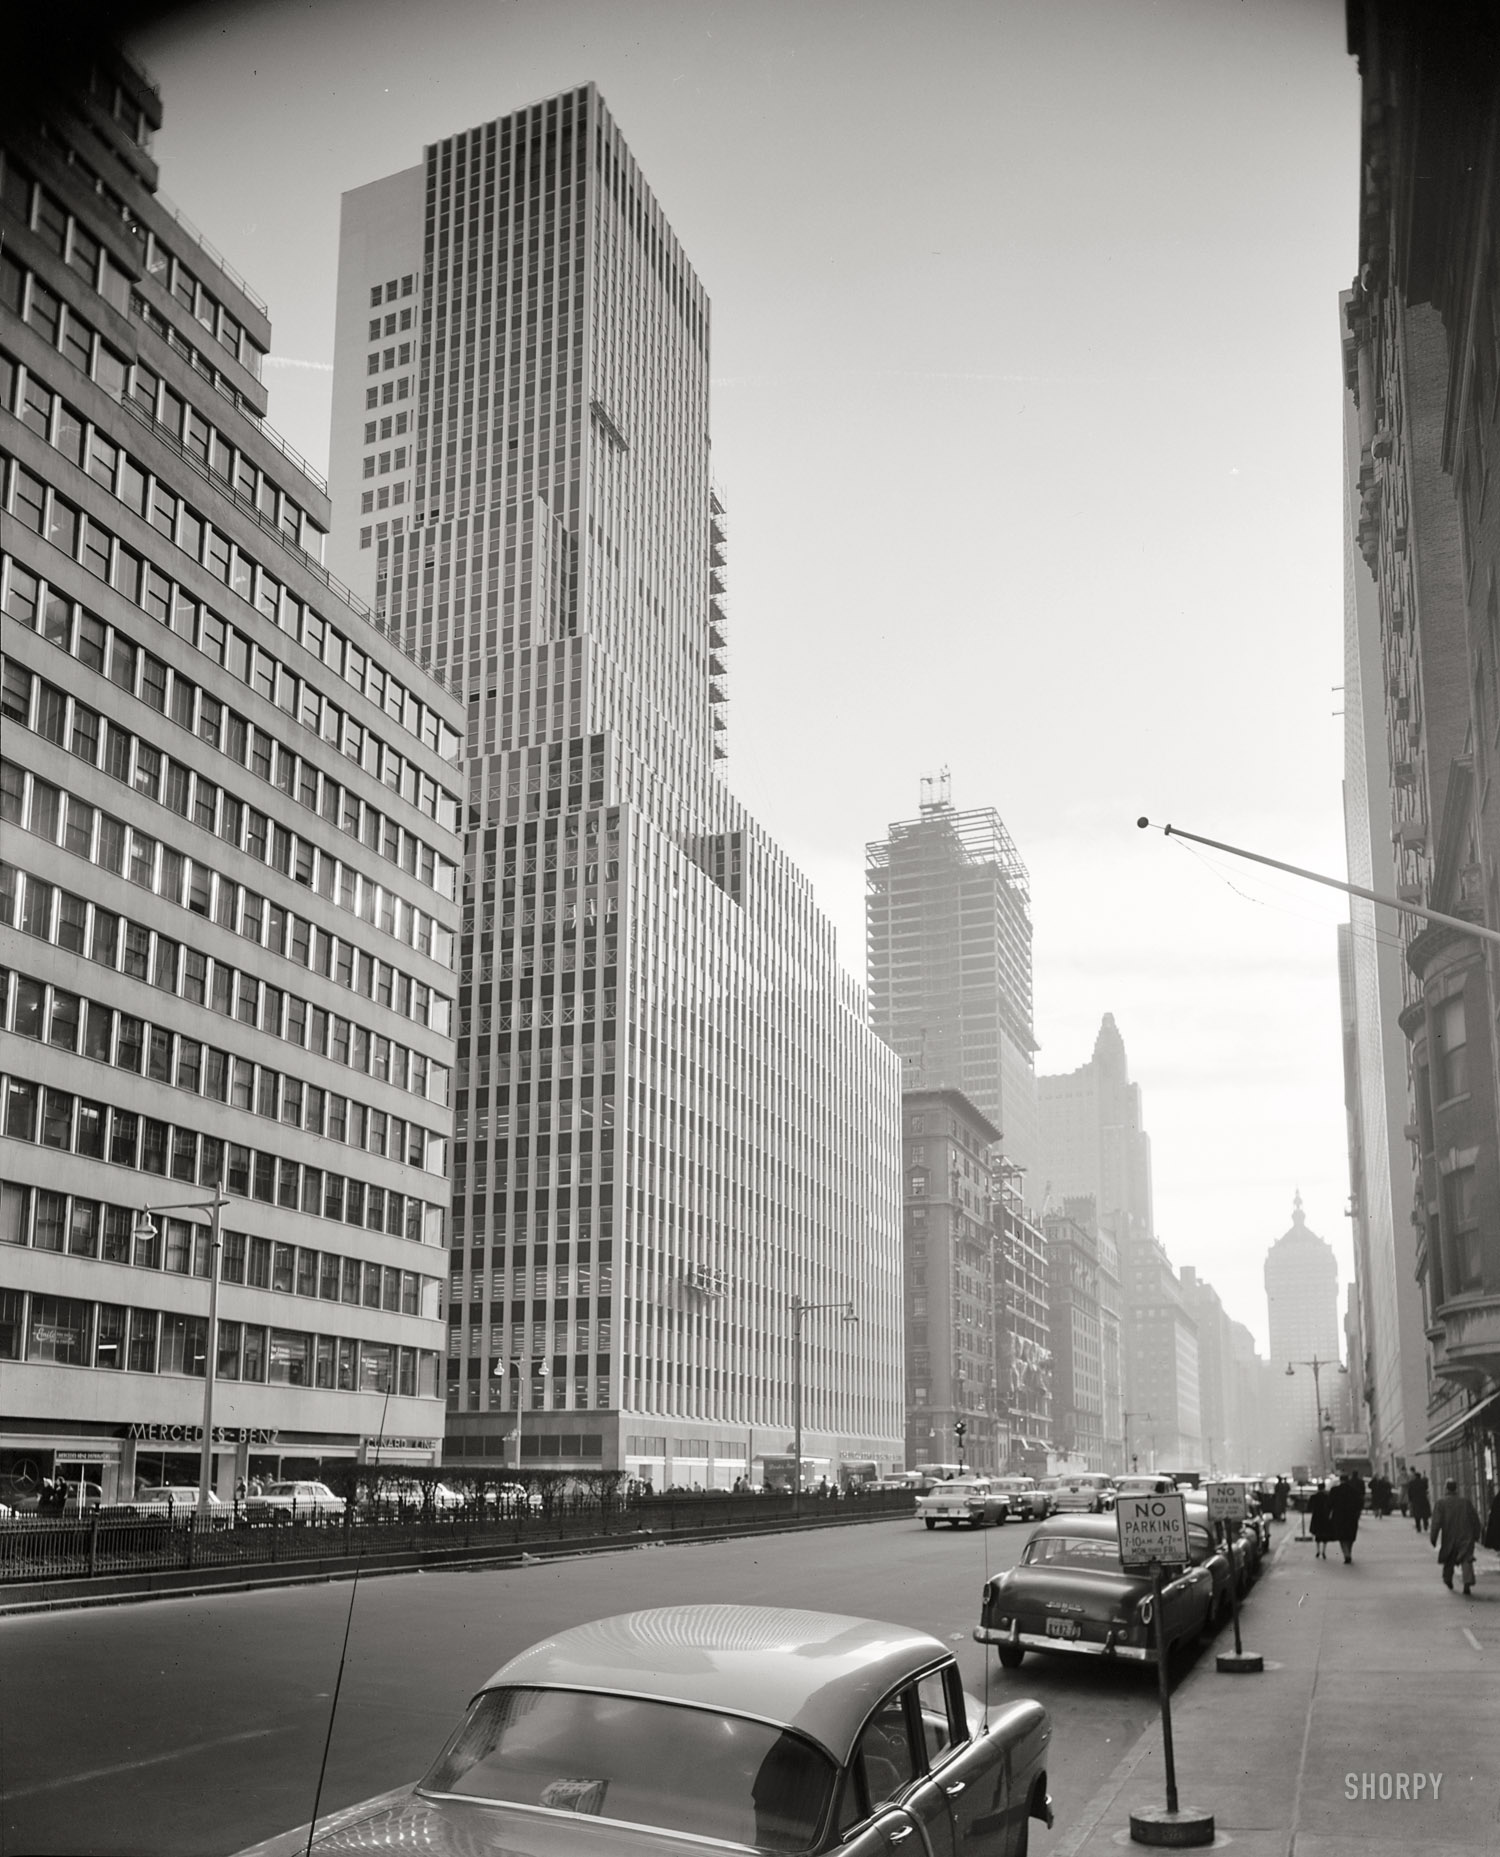 January 23, 1957. "425 Park Avenue From northwest." Going up down the street: The Seagram Building. Safety negative by Gottscho-Schleisner. View full size.